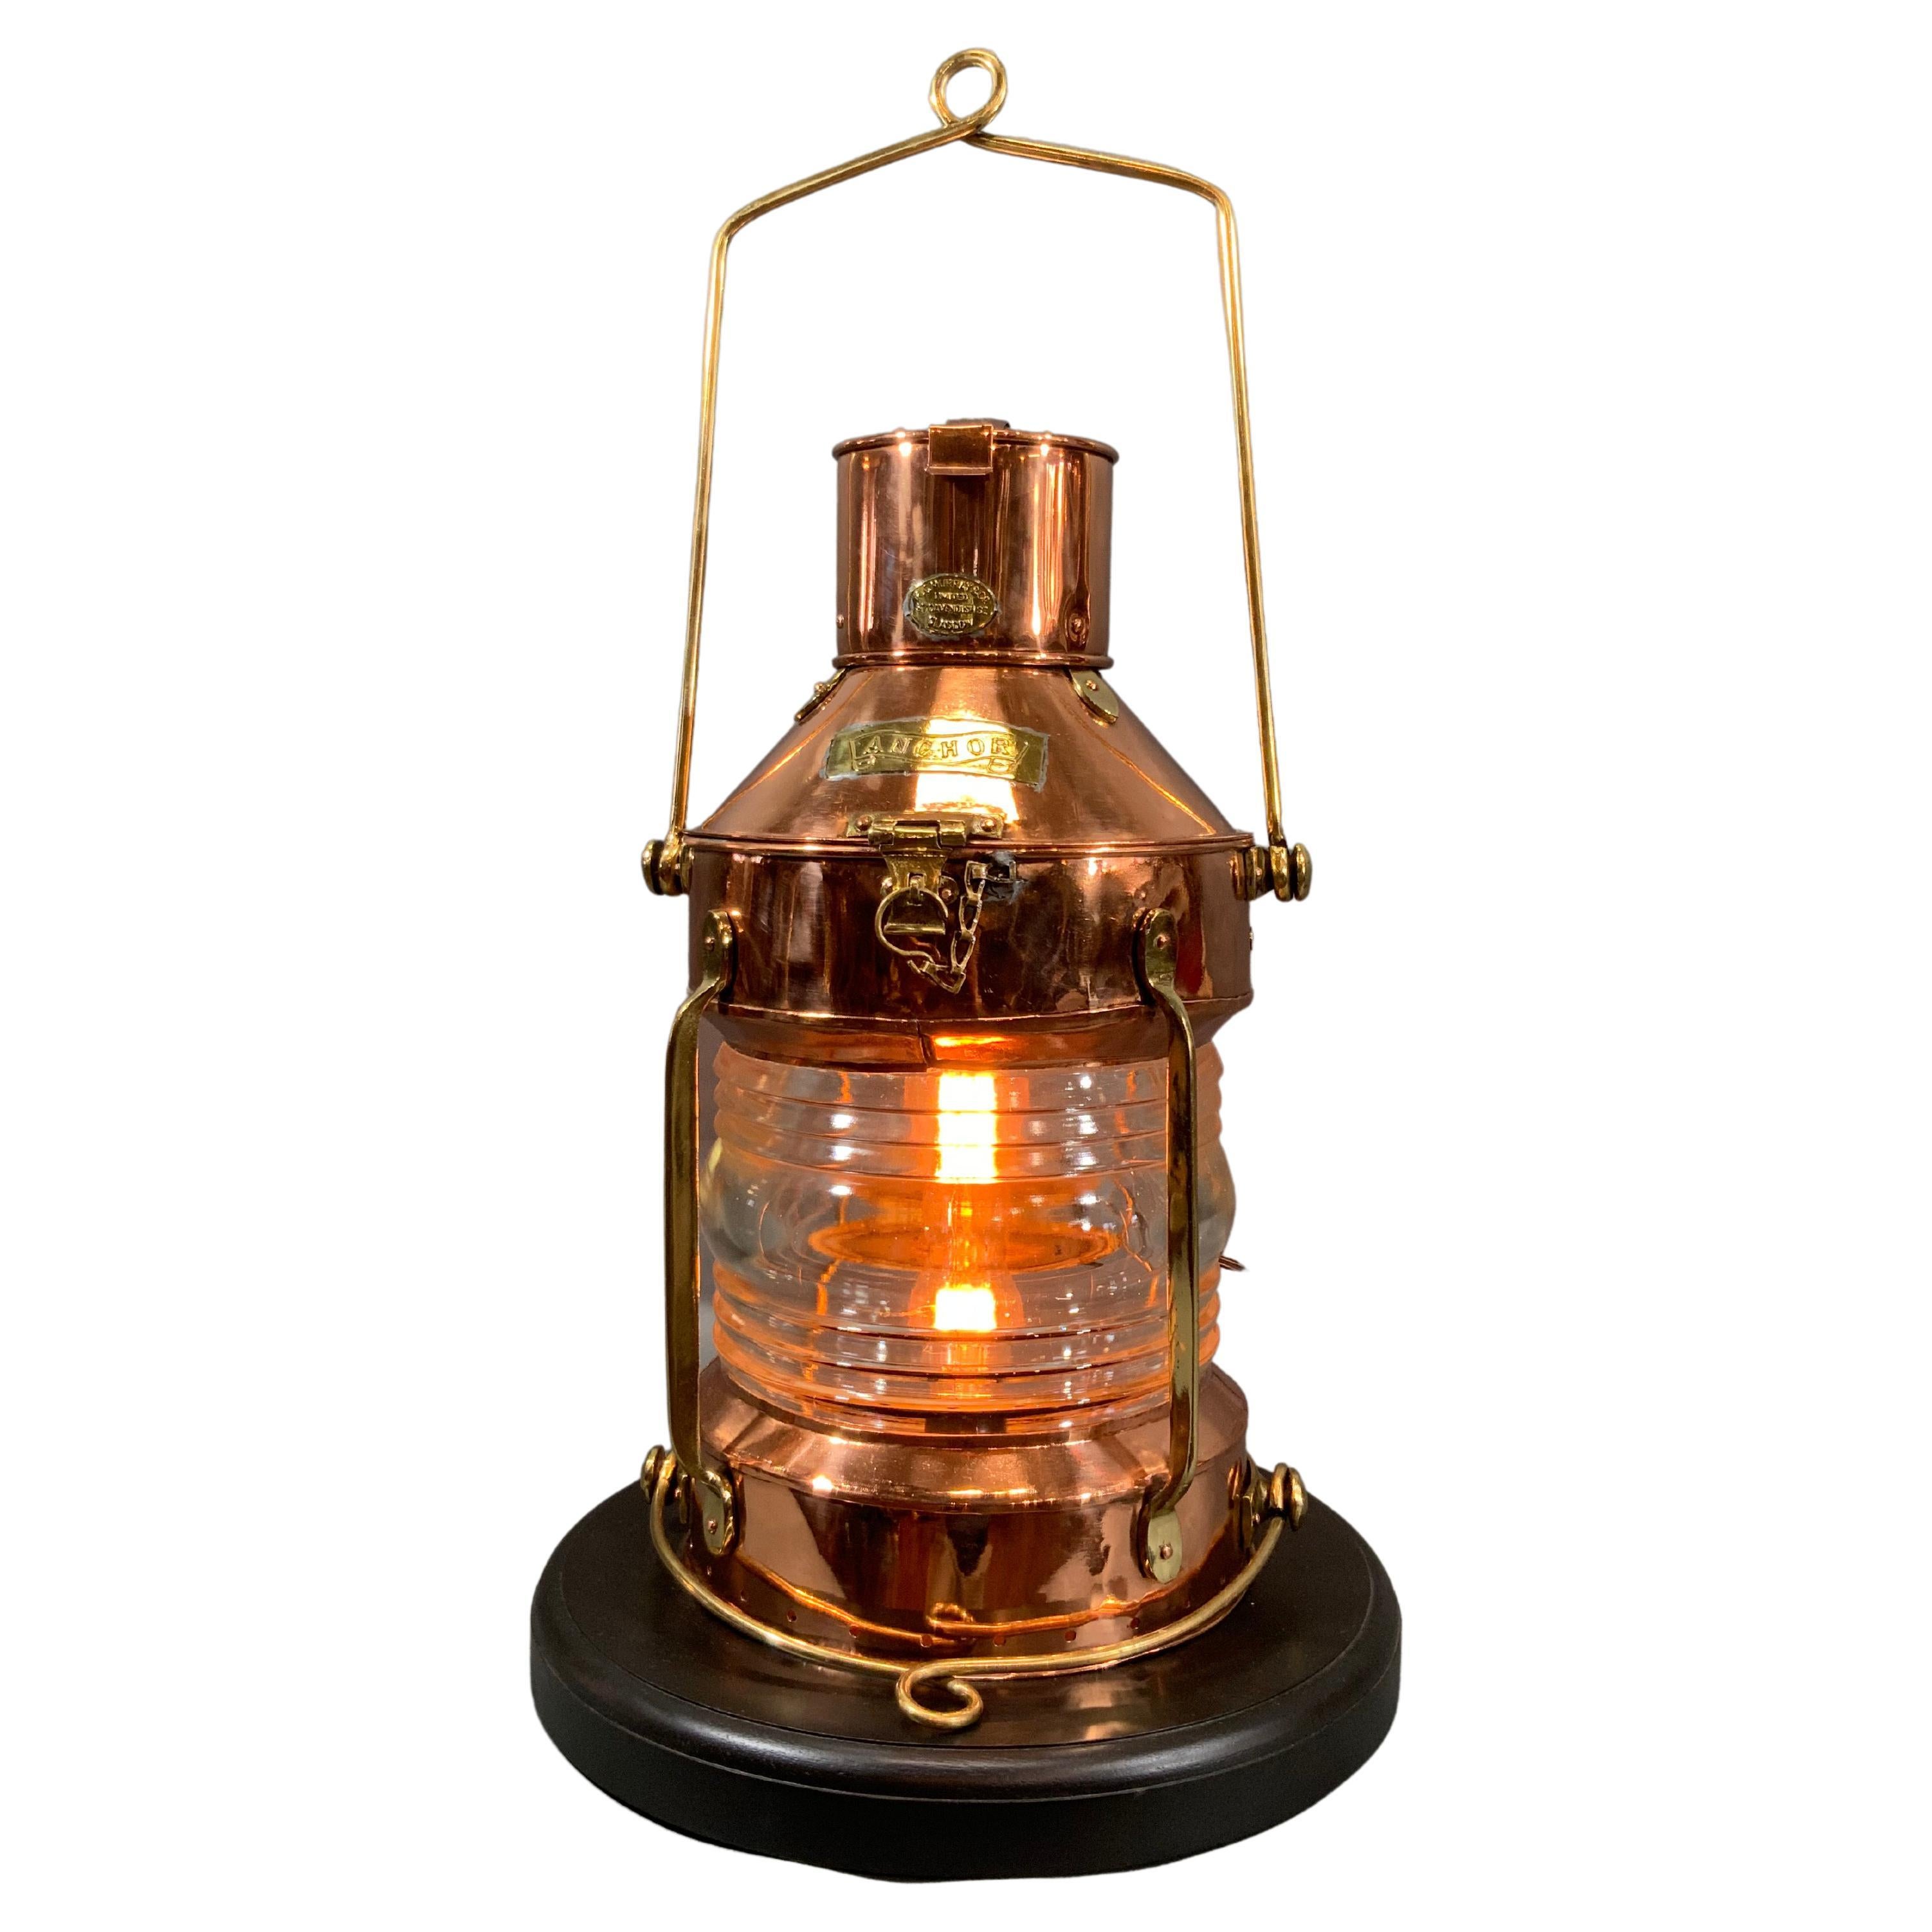 Ship's Anchor Lantern of Copper and Brass with Fresnel Glass Lens by R.C. Murray